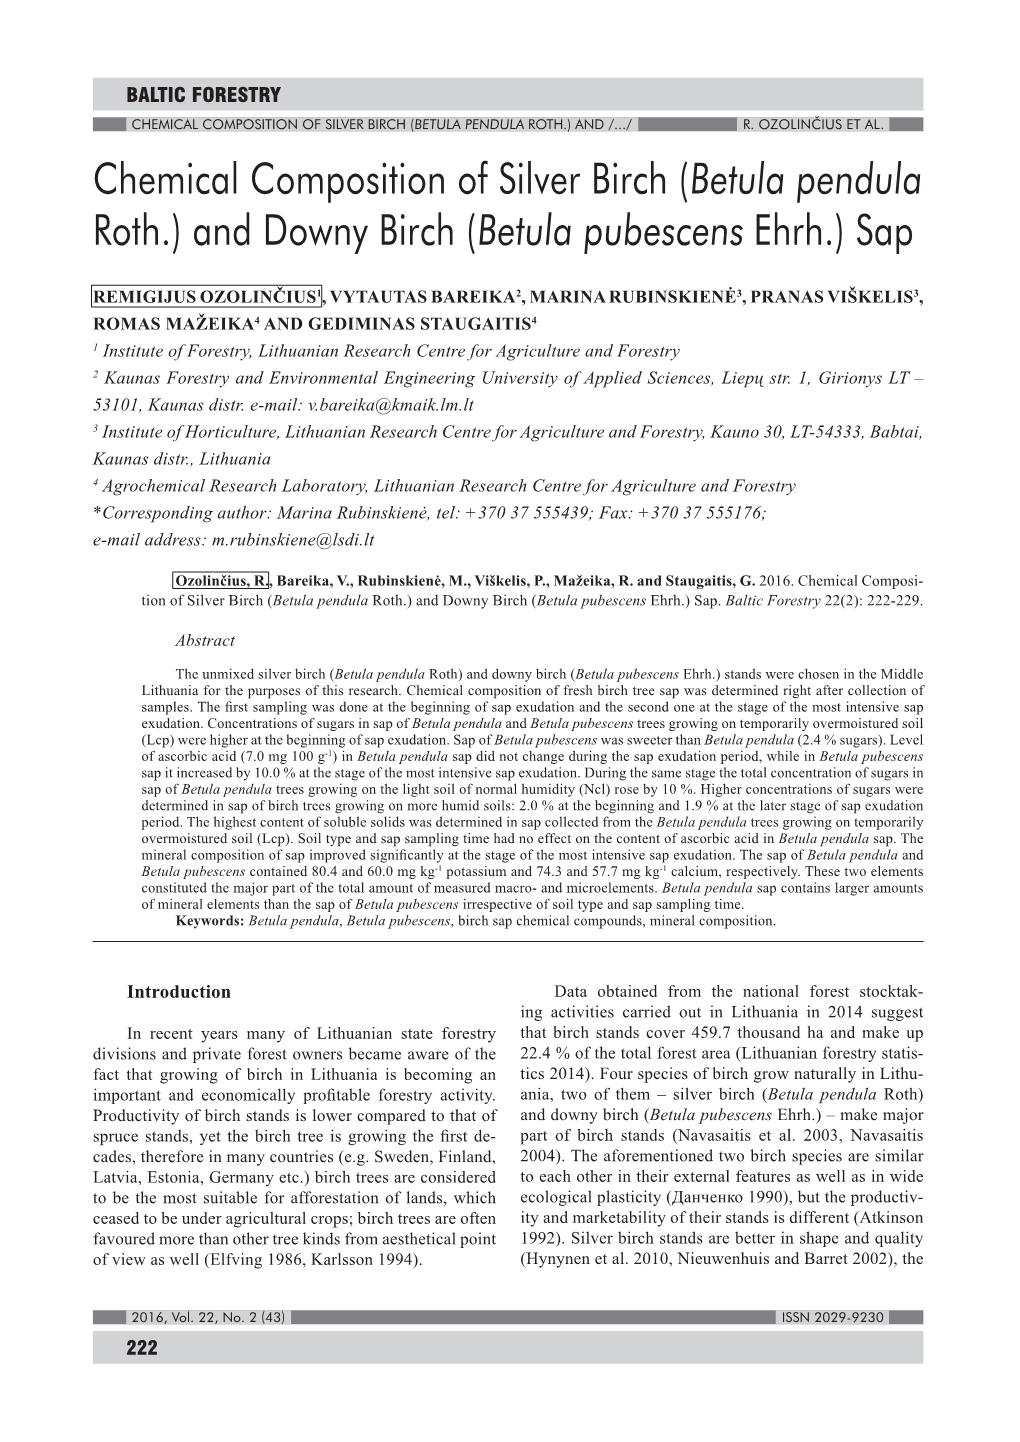 Chemical Composition of Silver Birch (Betula Pendula Roth.) and Downy Birch (Betula Pubescens Ehrh.) Sap